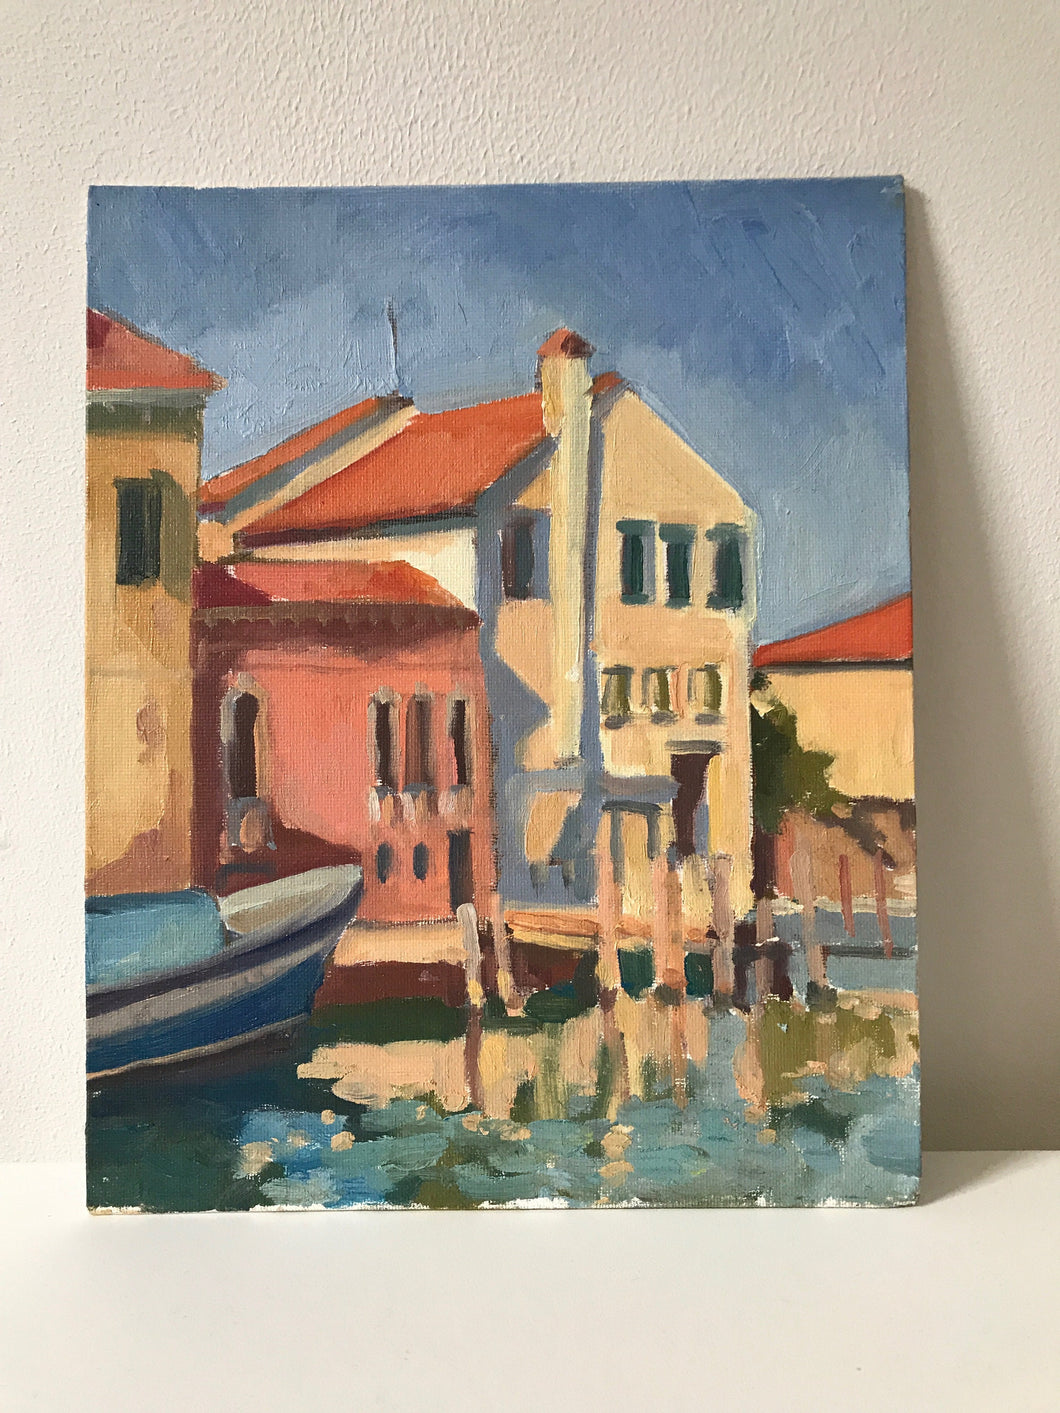 Murano Italy original painting on panel. Italian landscape painting. Venice landscape painting. Figurative oil painting on board